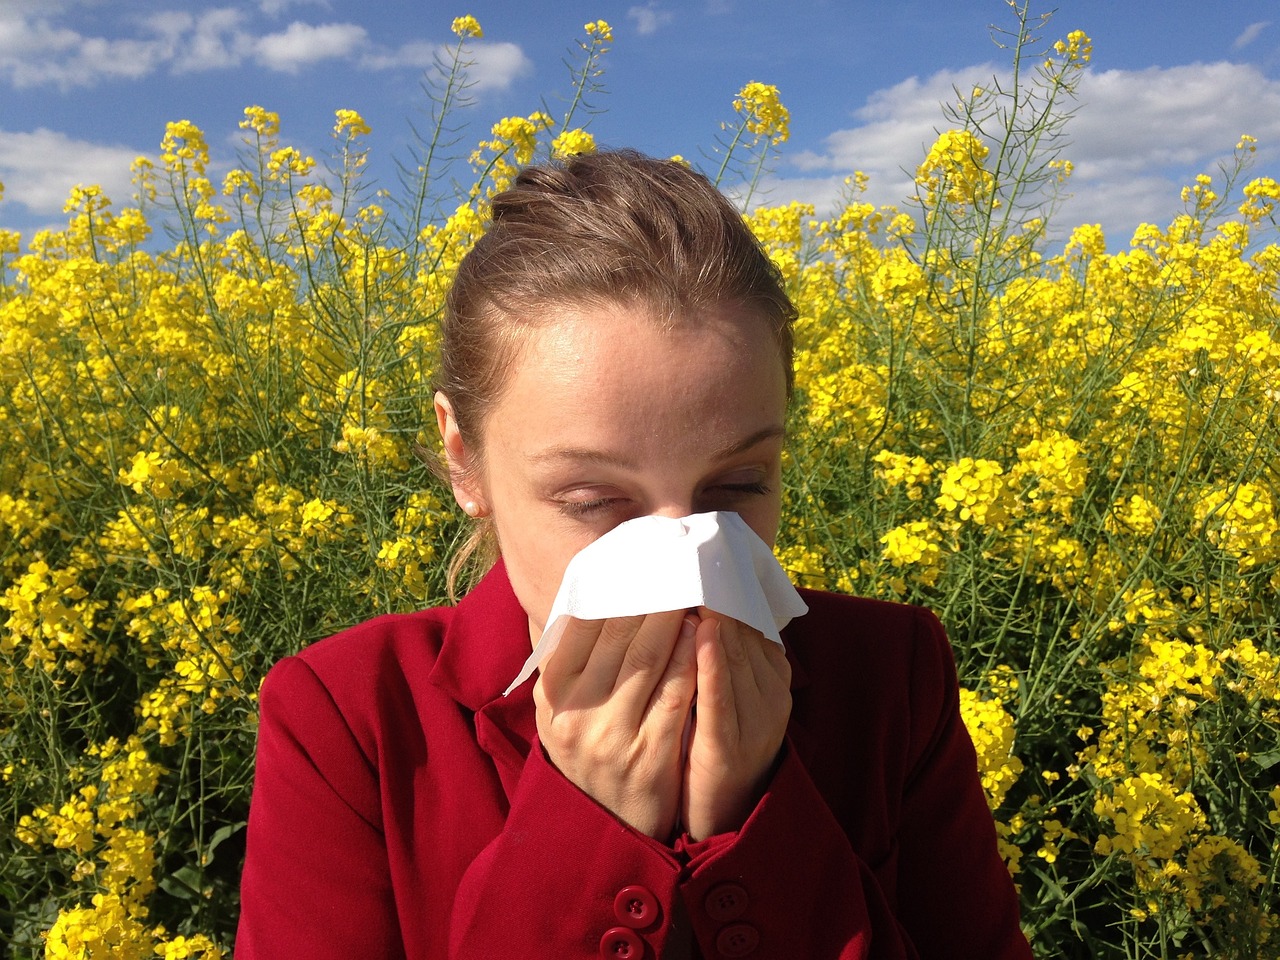 How Can You Prevent or Treat Allergies